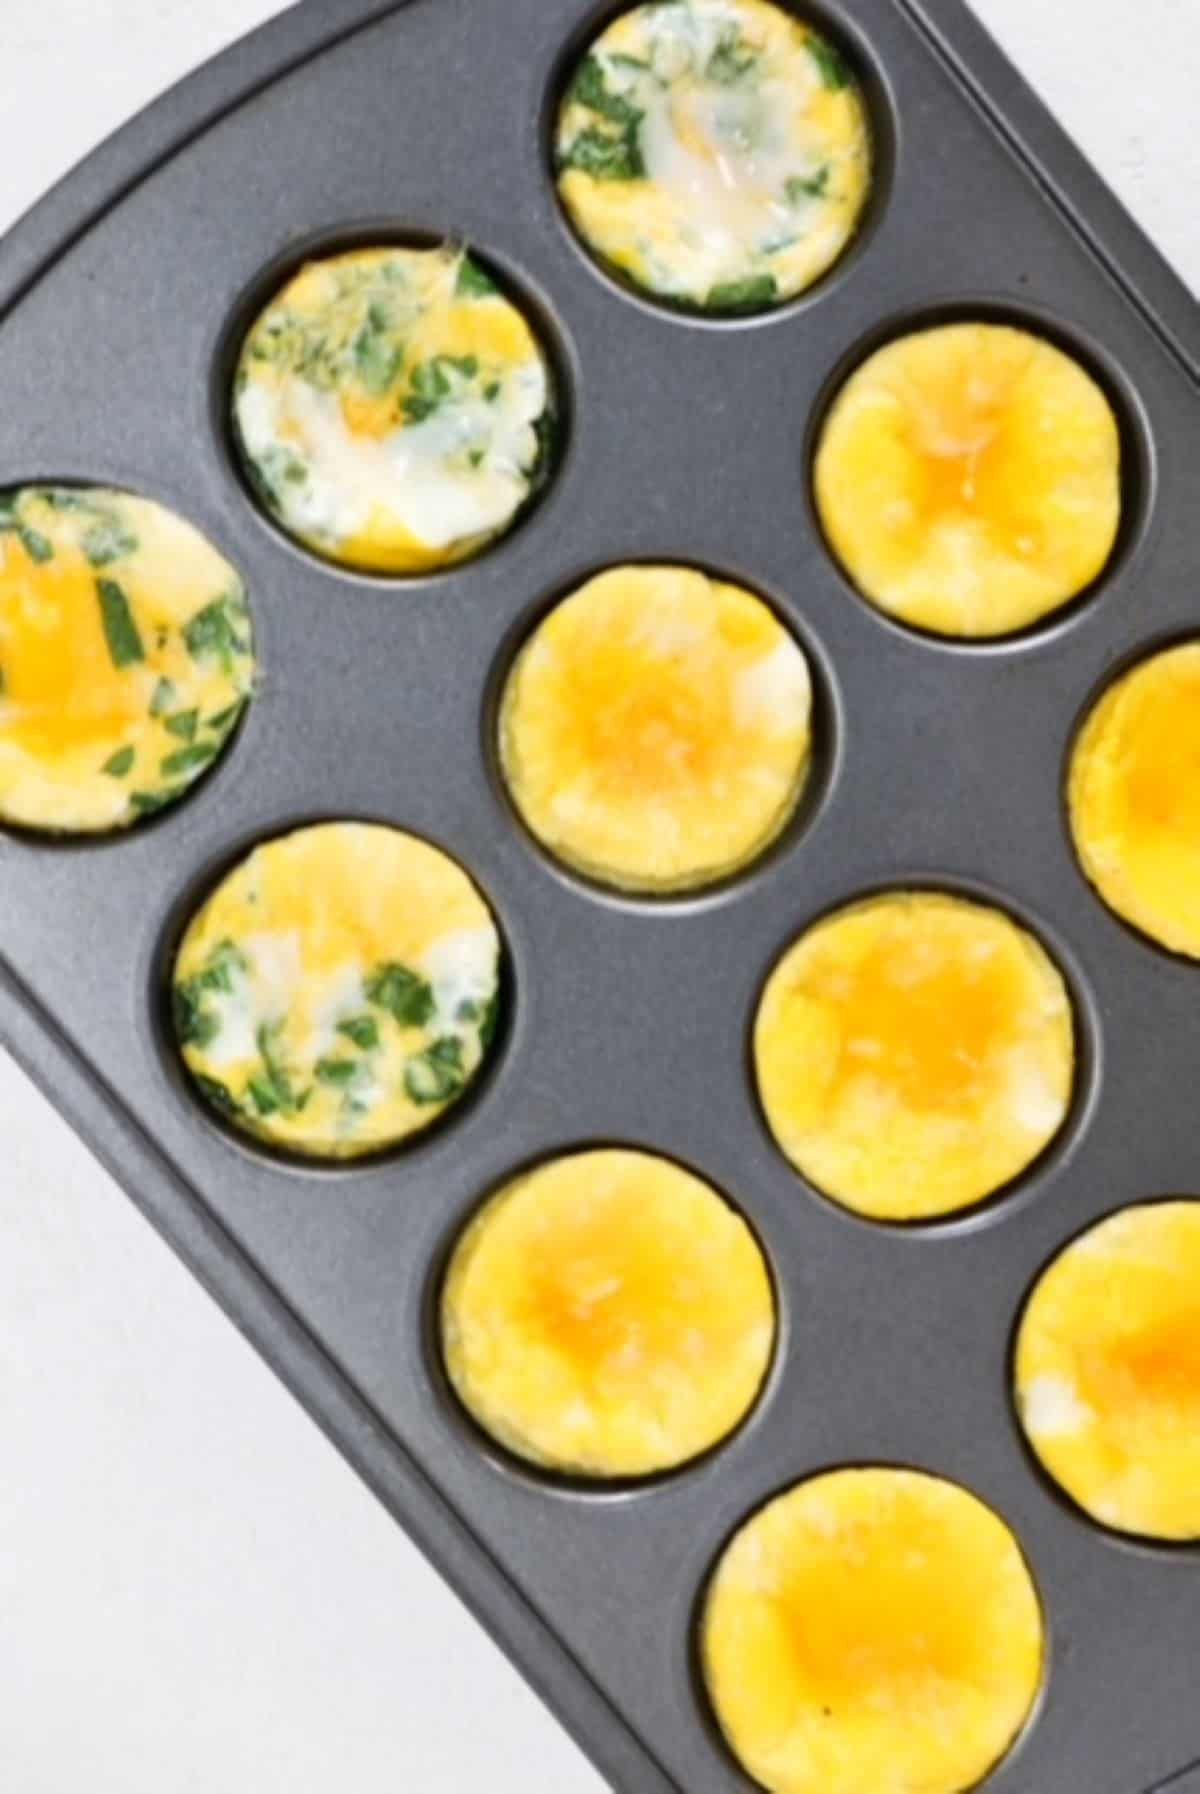 Baked eggs in a muffin tin, some plain and some with spinach and cheese.